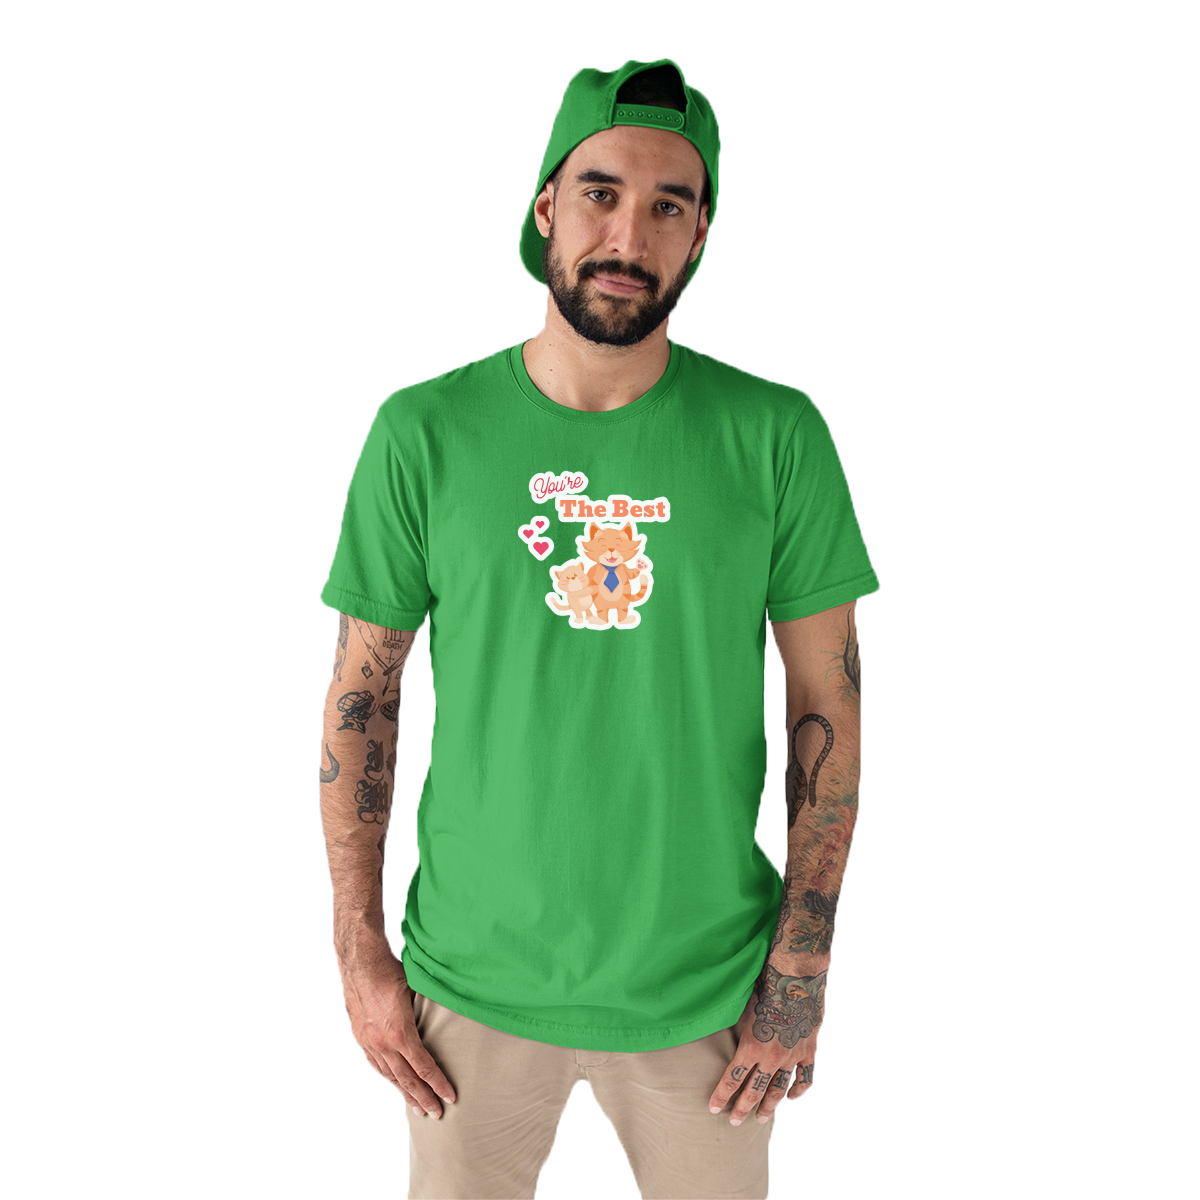 You are the Best Men's T-shirt | Green